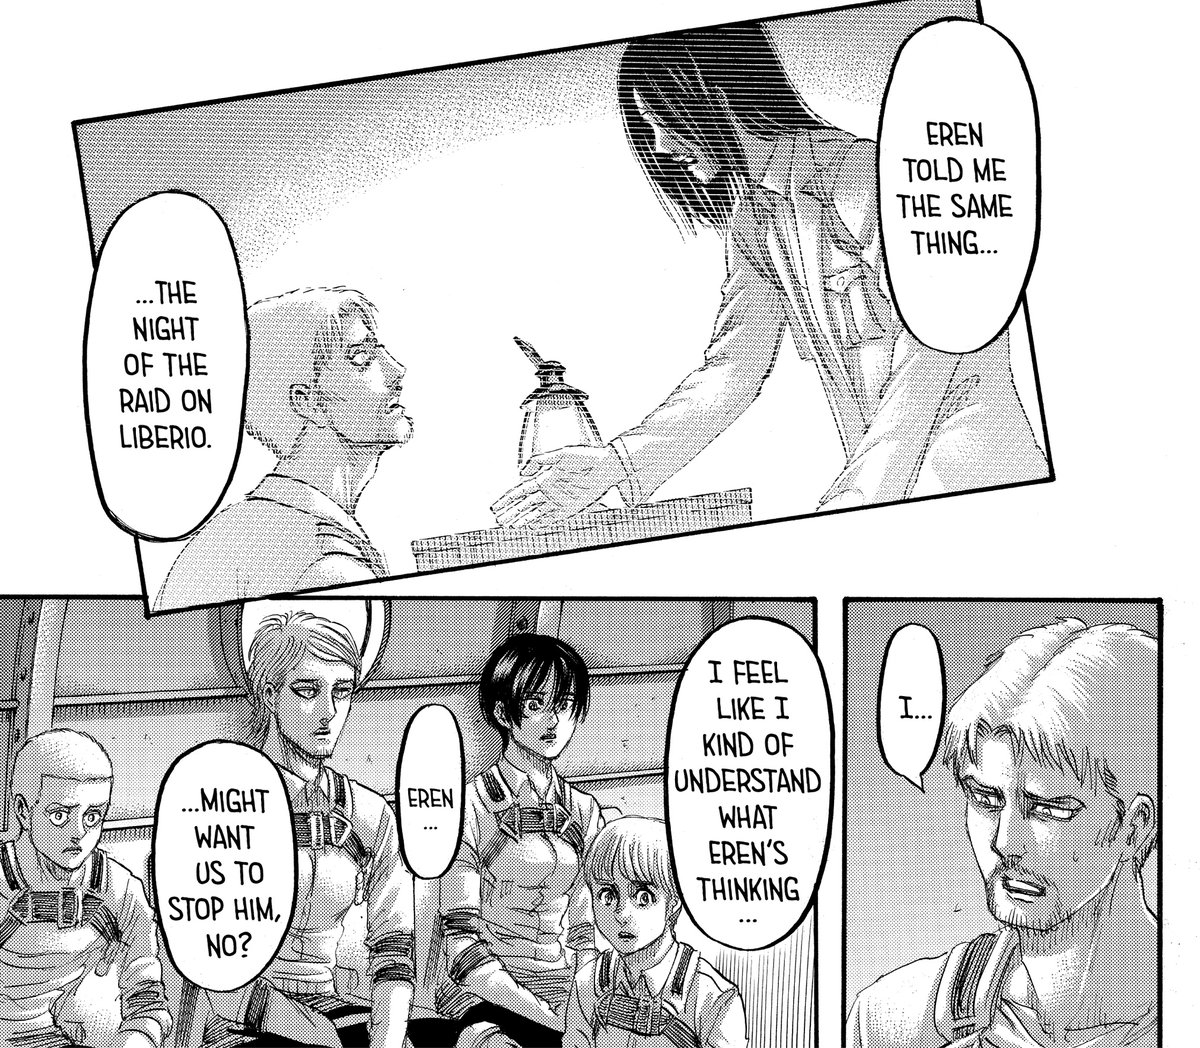 And Reiner approves backWITH THE SAME SCENE Eren told him that they were the same“I.. I feel like I kind of understand what Eren's thinking”Like they both said itHe KNOWS what Eren WANTSRefusing to sacrifice Armin, because he himself said that YOU'RE the only hope